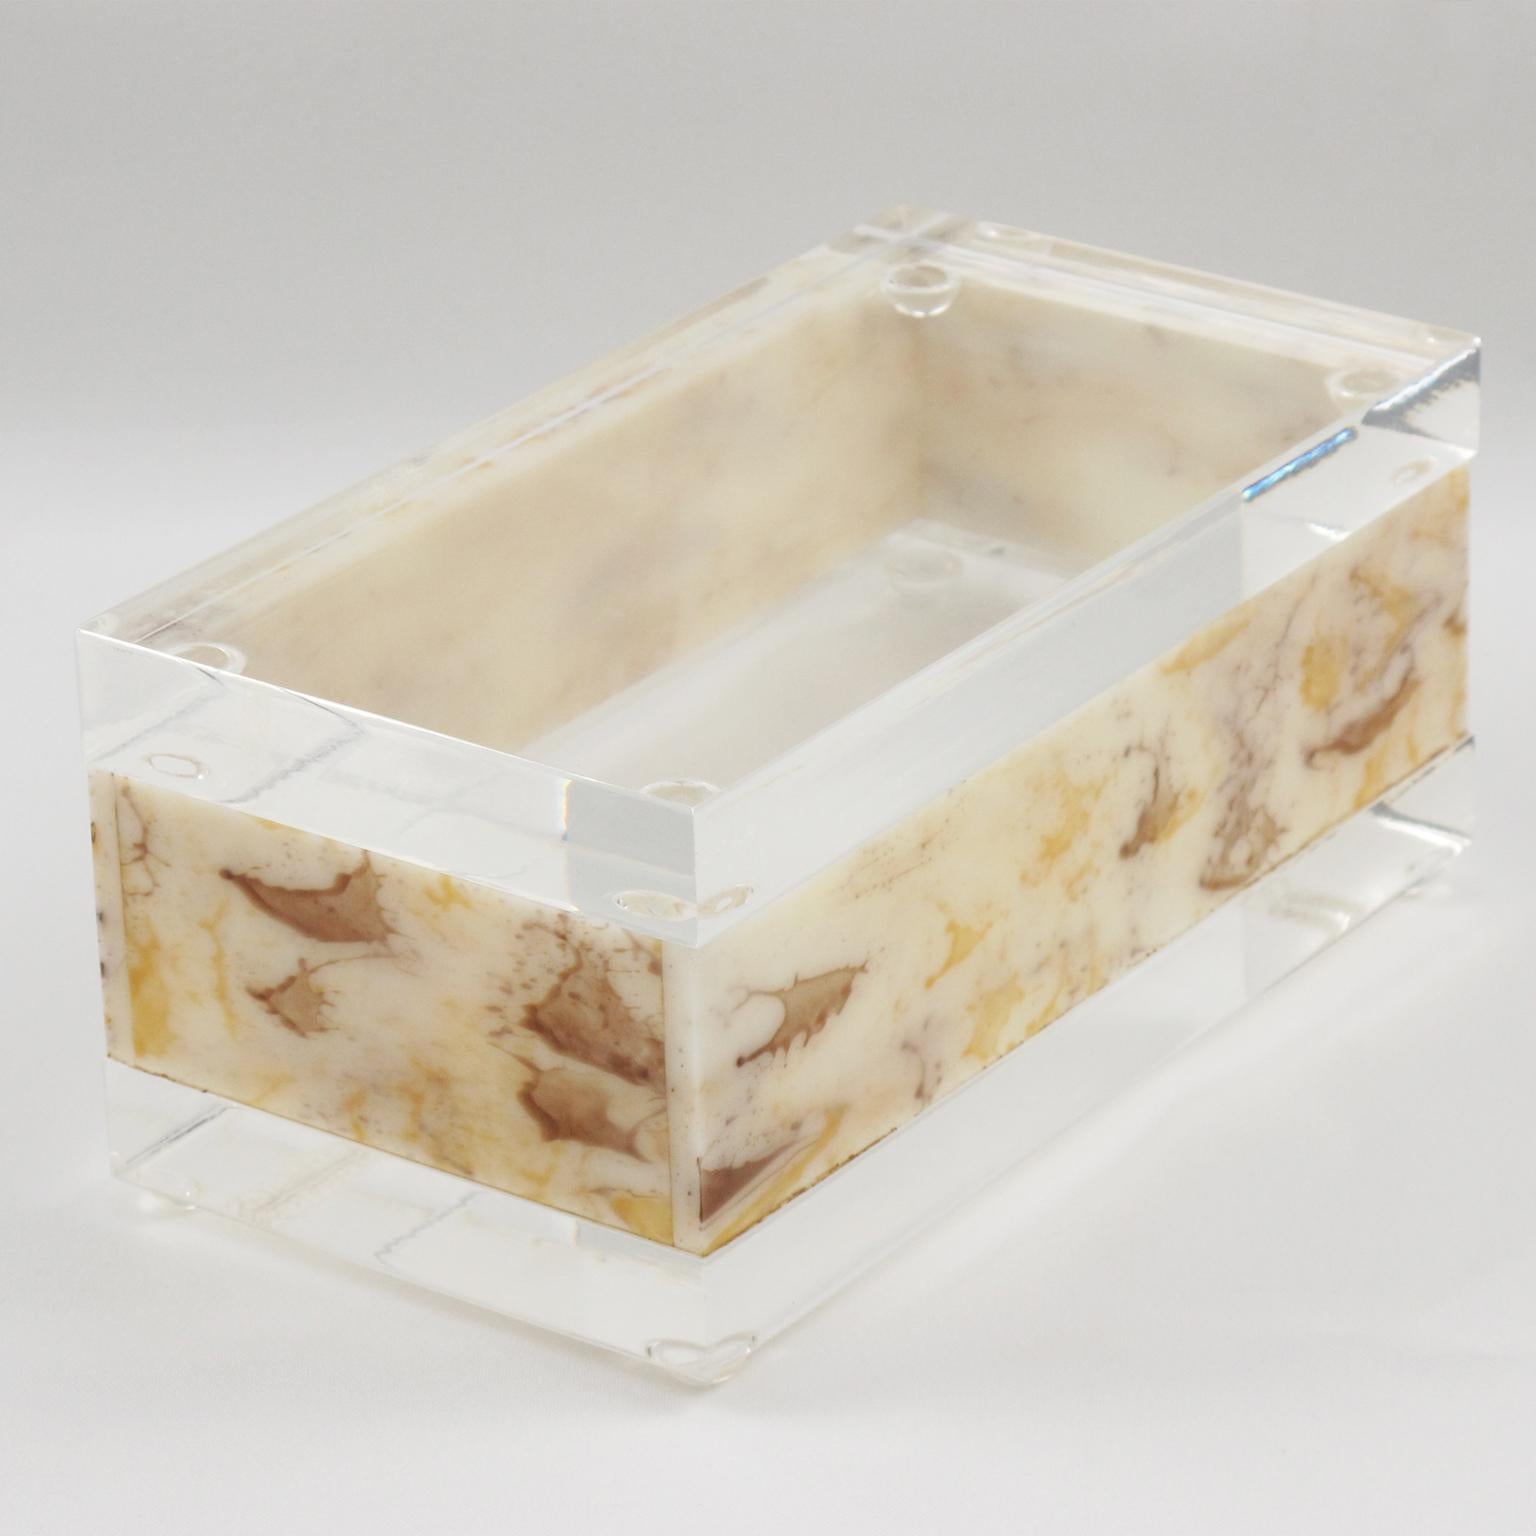 Acrylic Marble-Like Lucite Box, 1970s For Sale